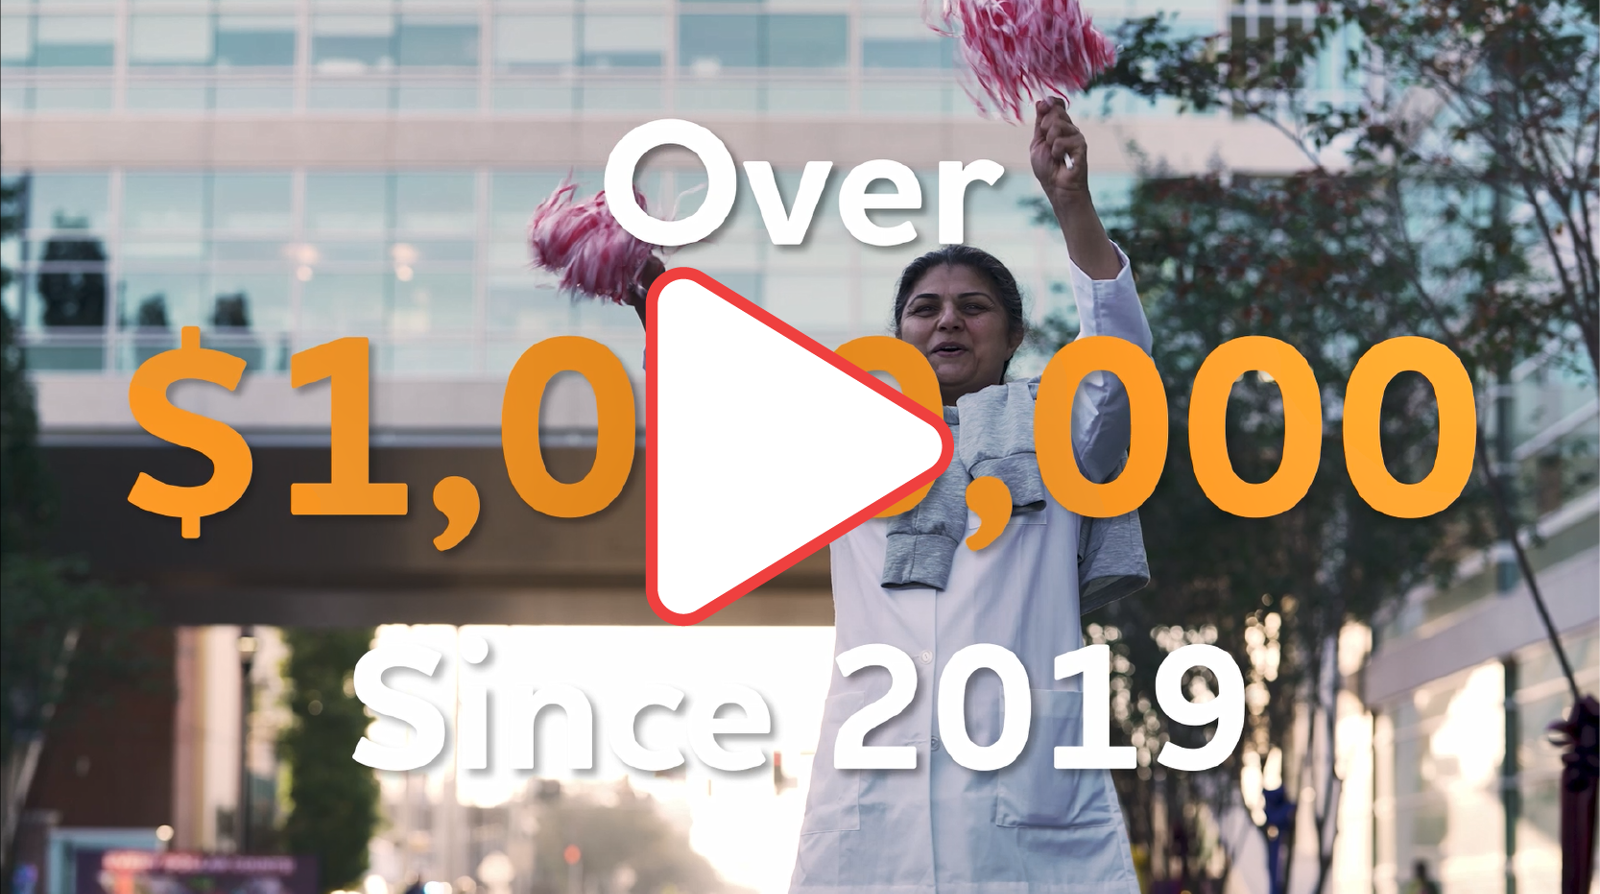 A researcher waving pom poms with the words "Over $1,000,000 since 2019." There is also a play symbol indicating a link.